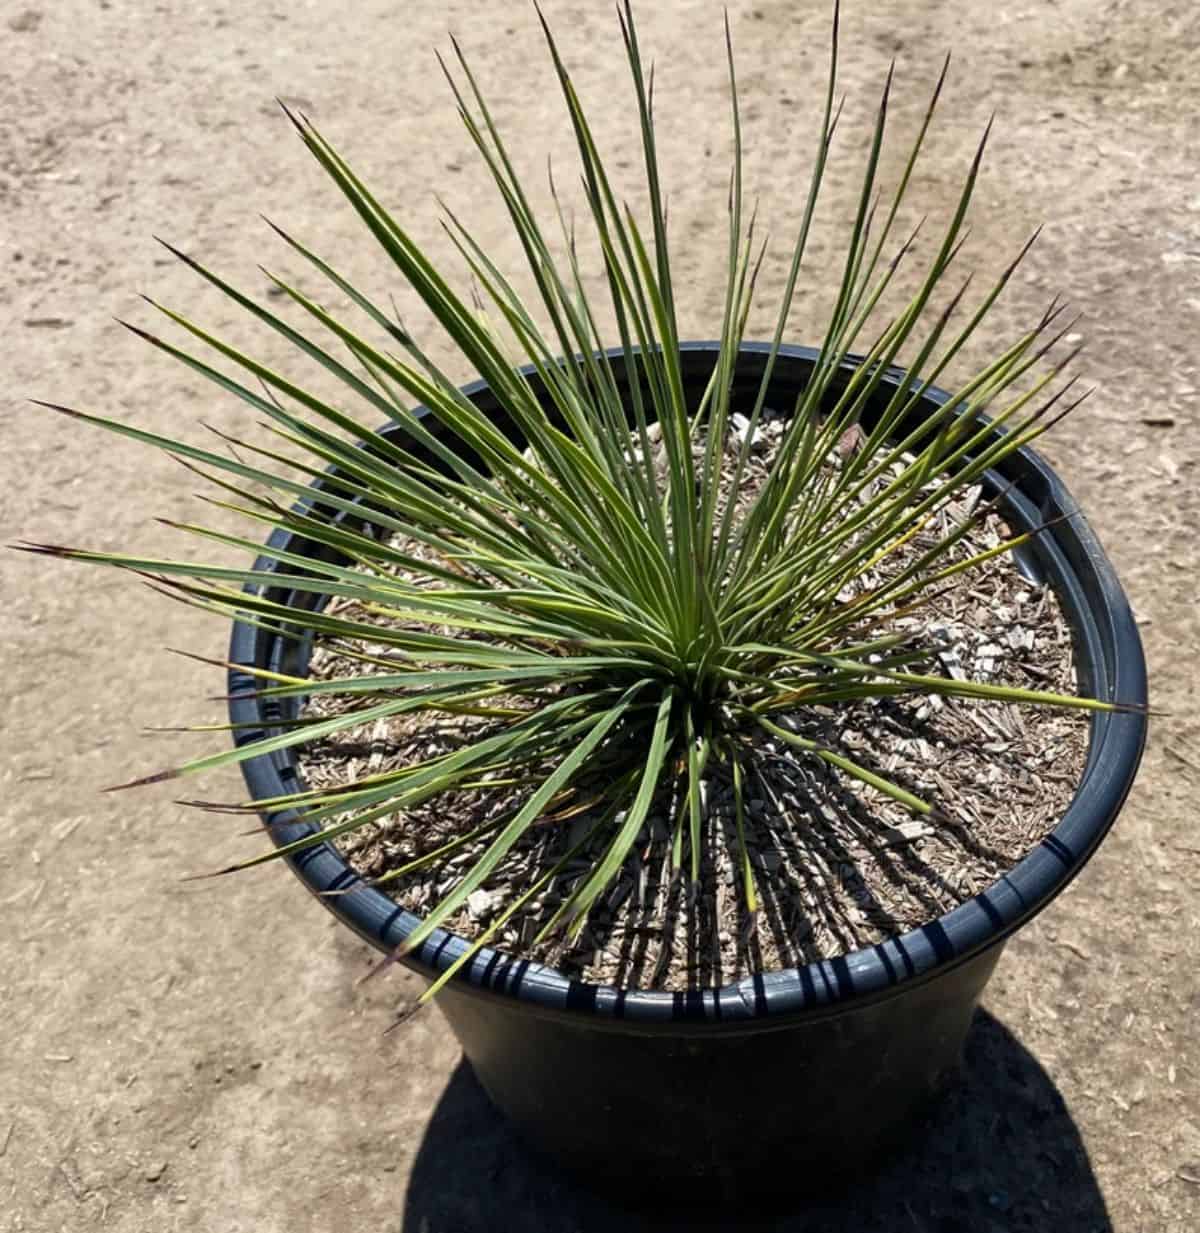 Yucca linearifolia grows in a plastic pot.